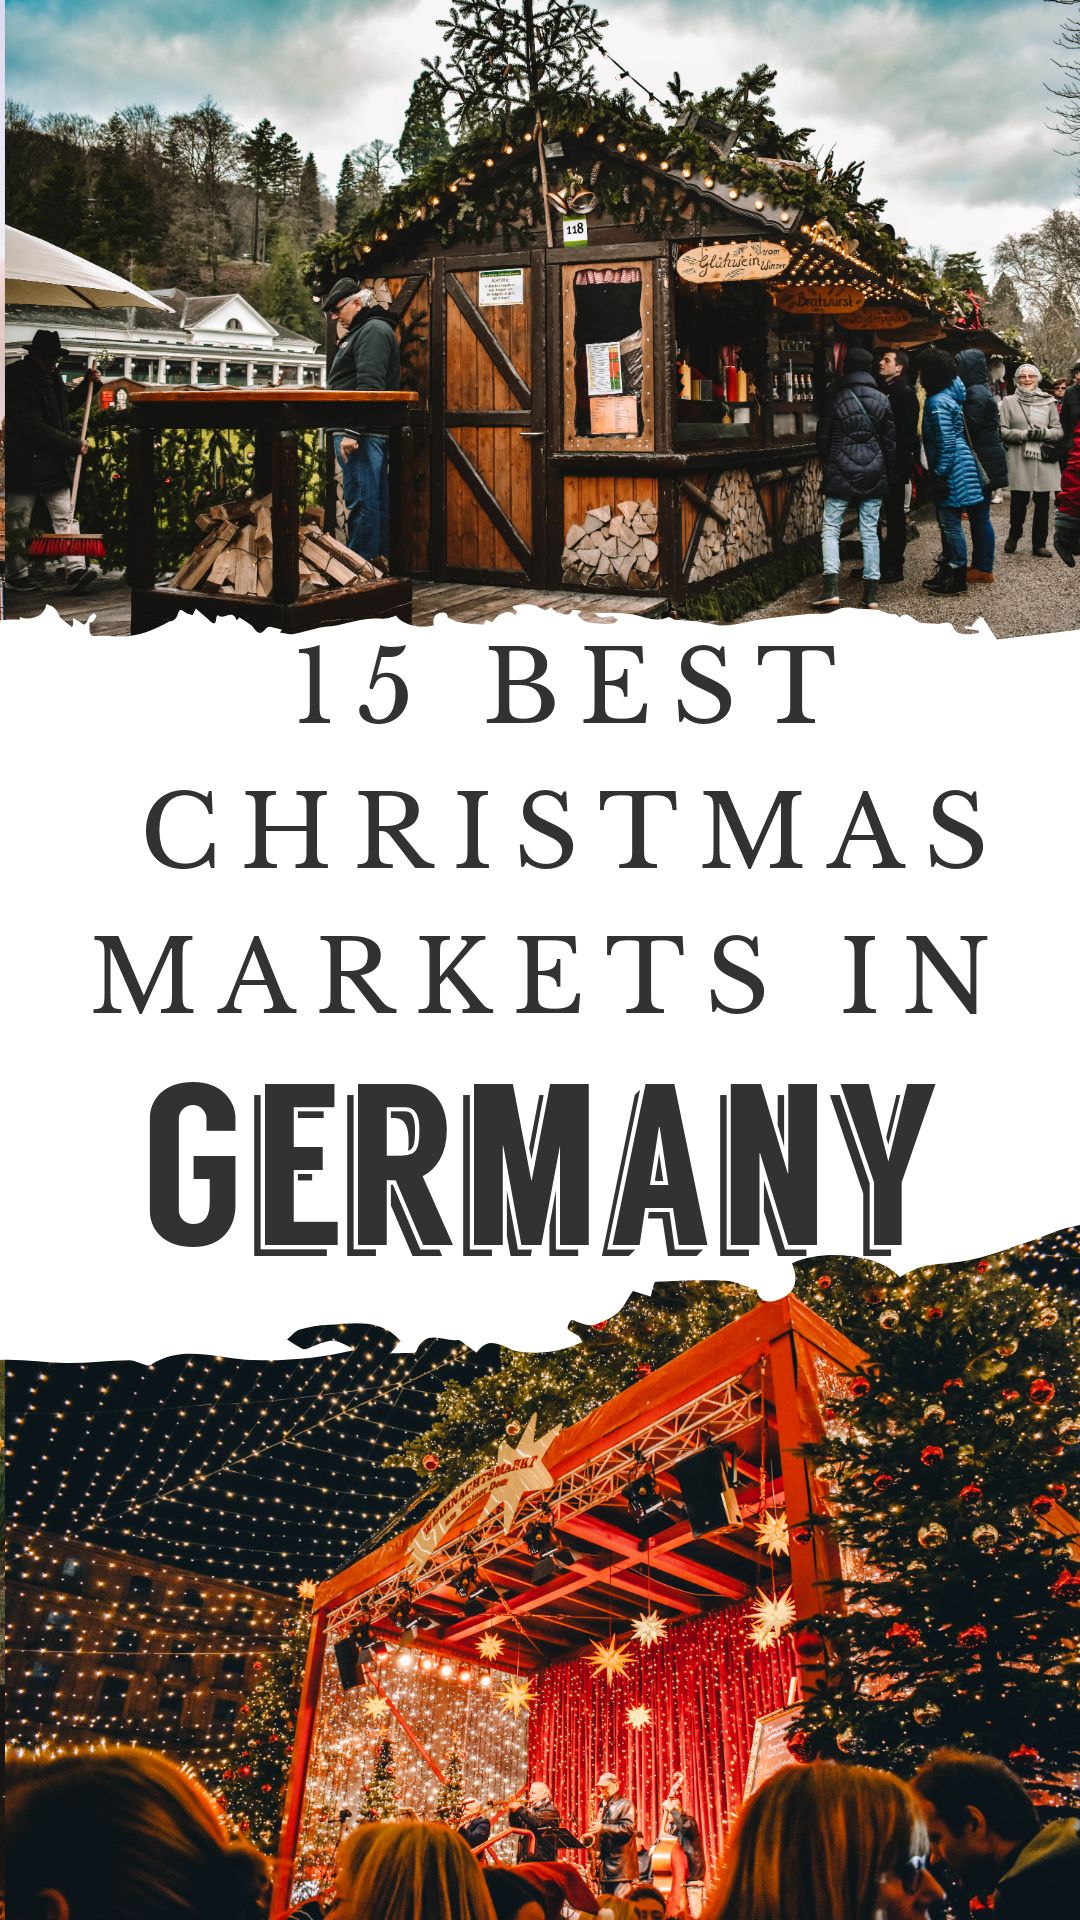 15 Best Christmas Markets in Germany